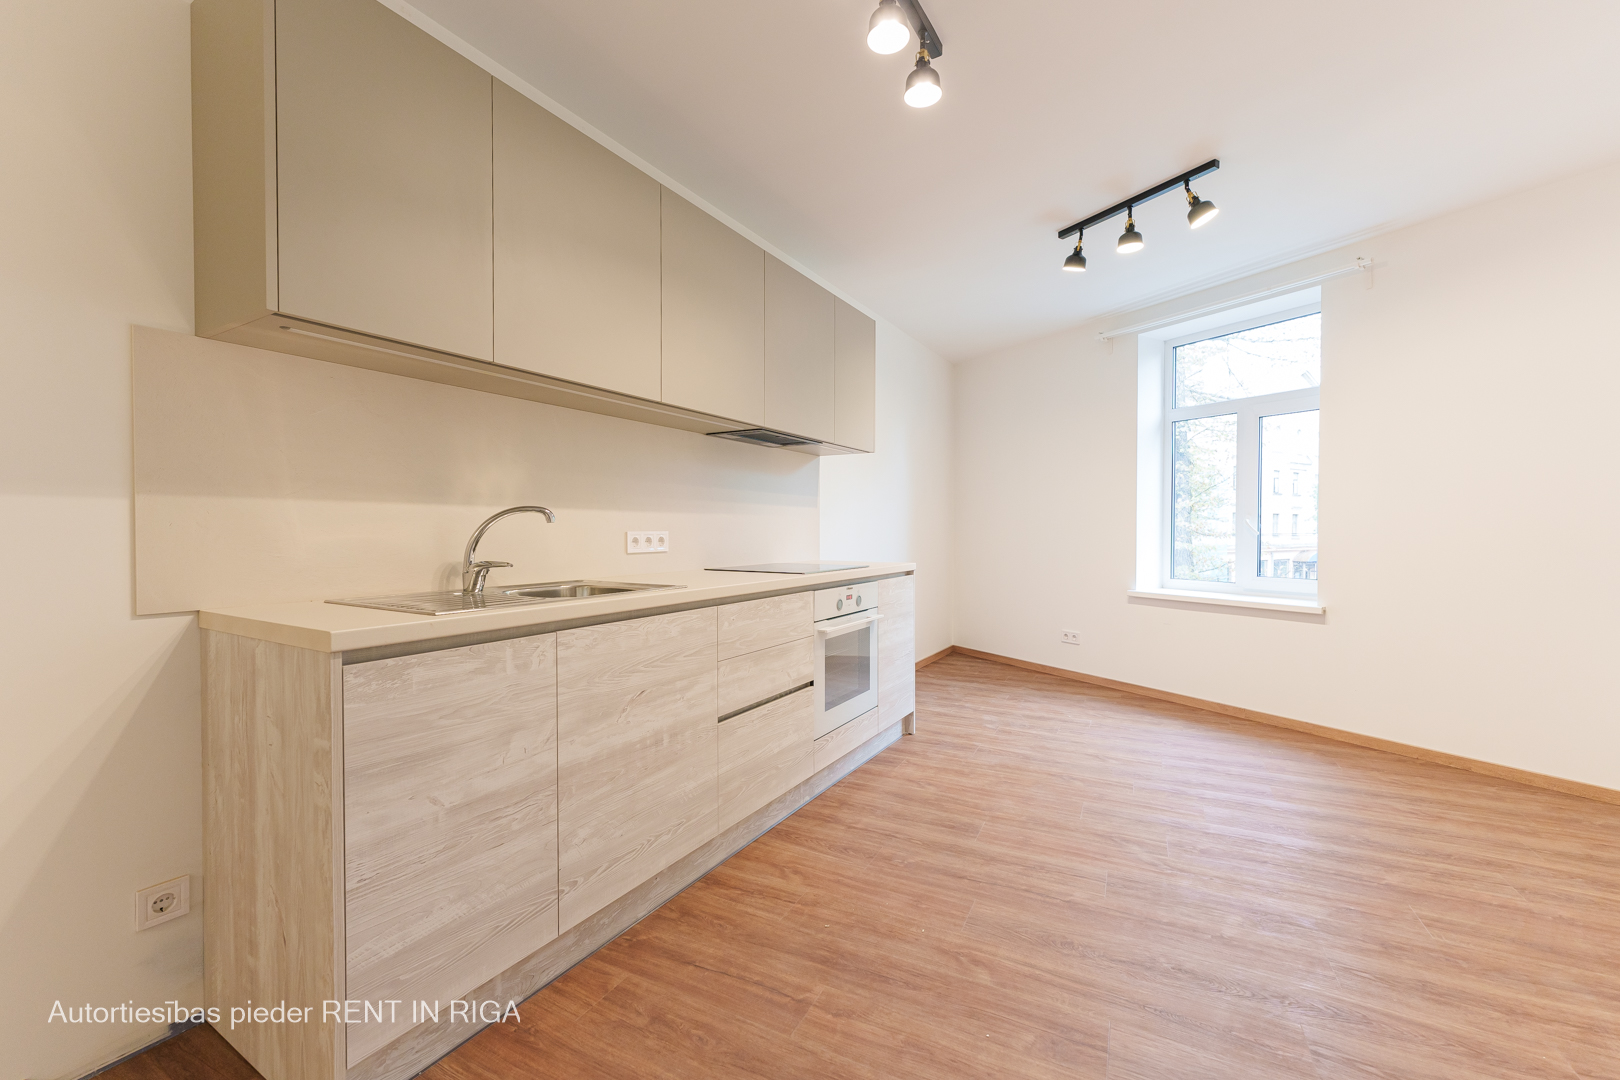 Apartment for rent, Mārupes street 13 - Image 1